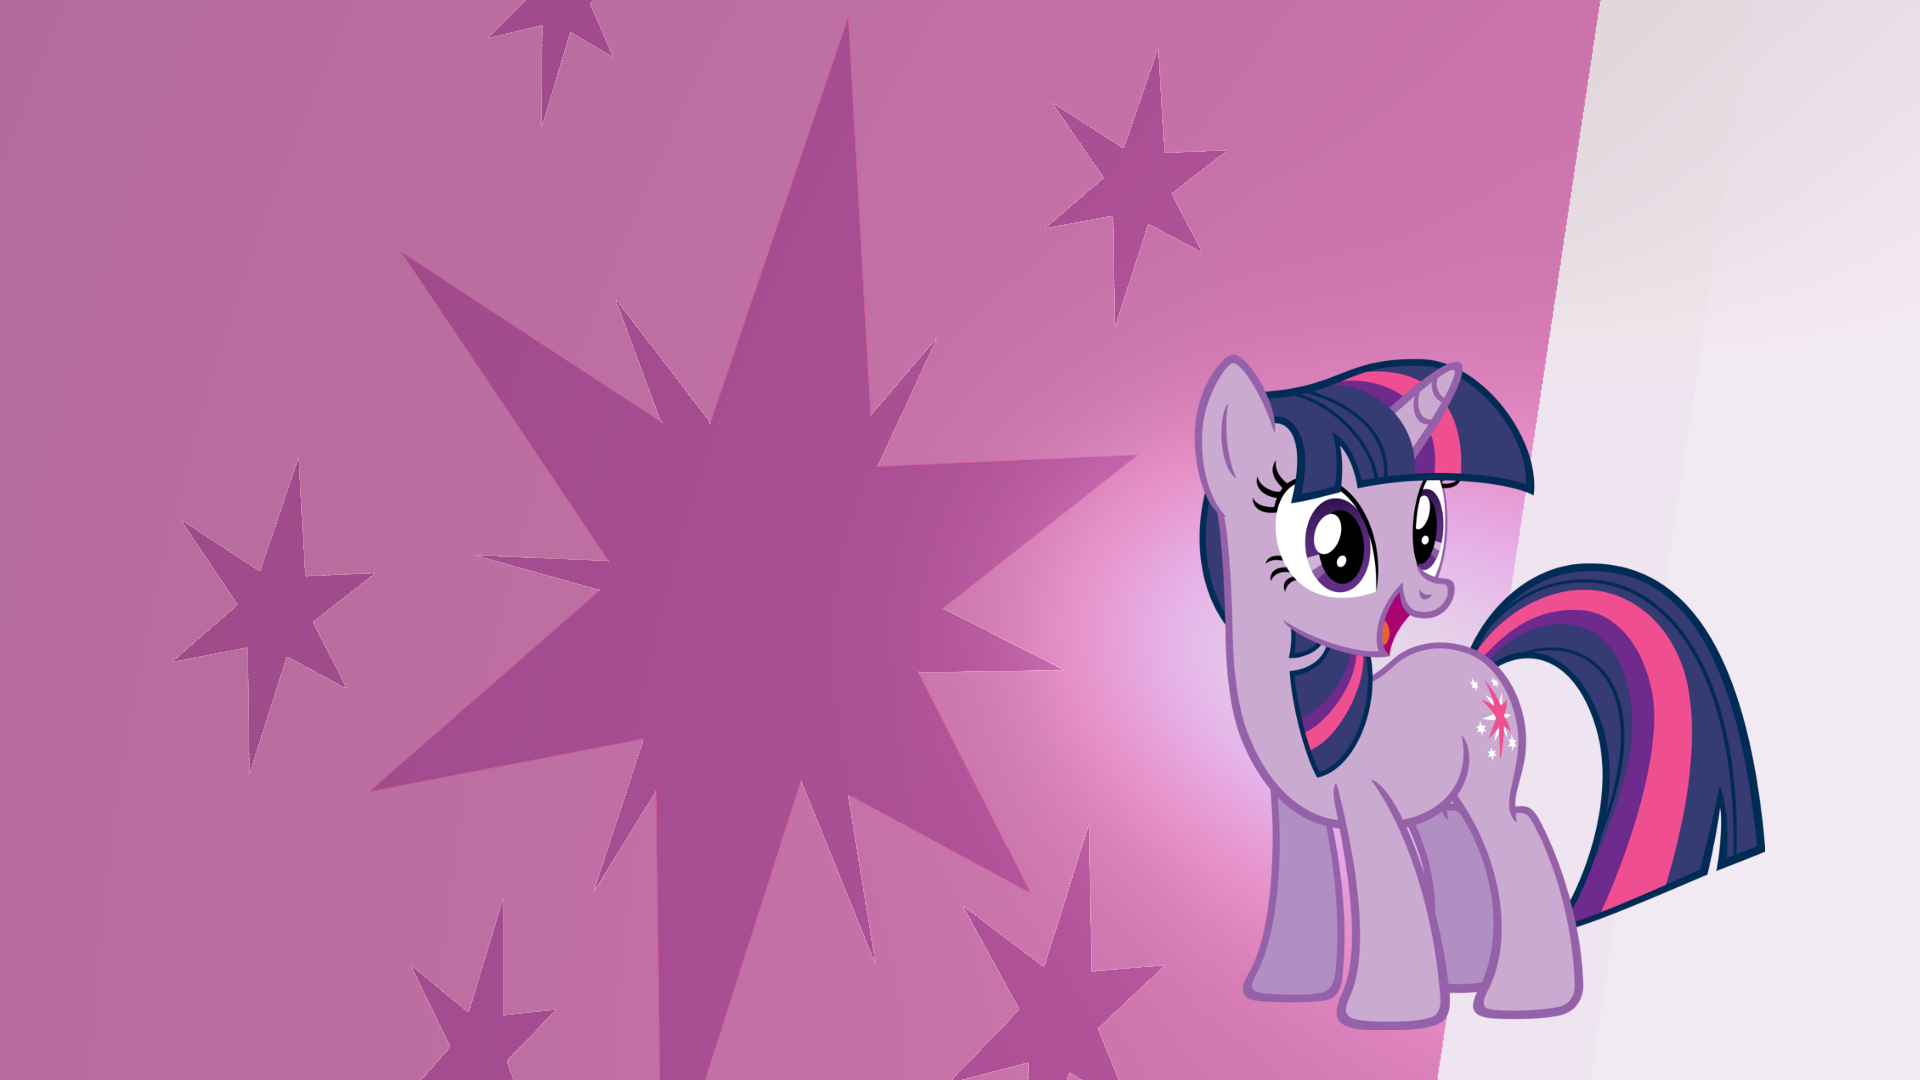 Twilight Sparkle Wallpaper by BlackGryph0n, MoongazePonies and RDbrony16